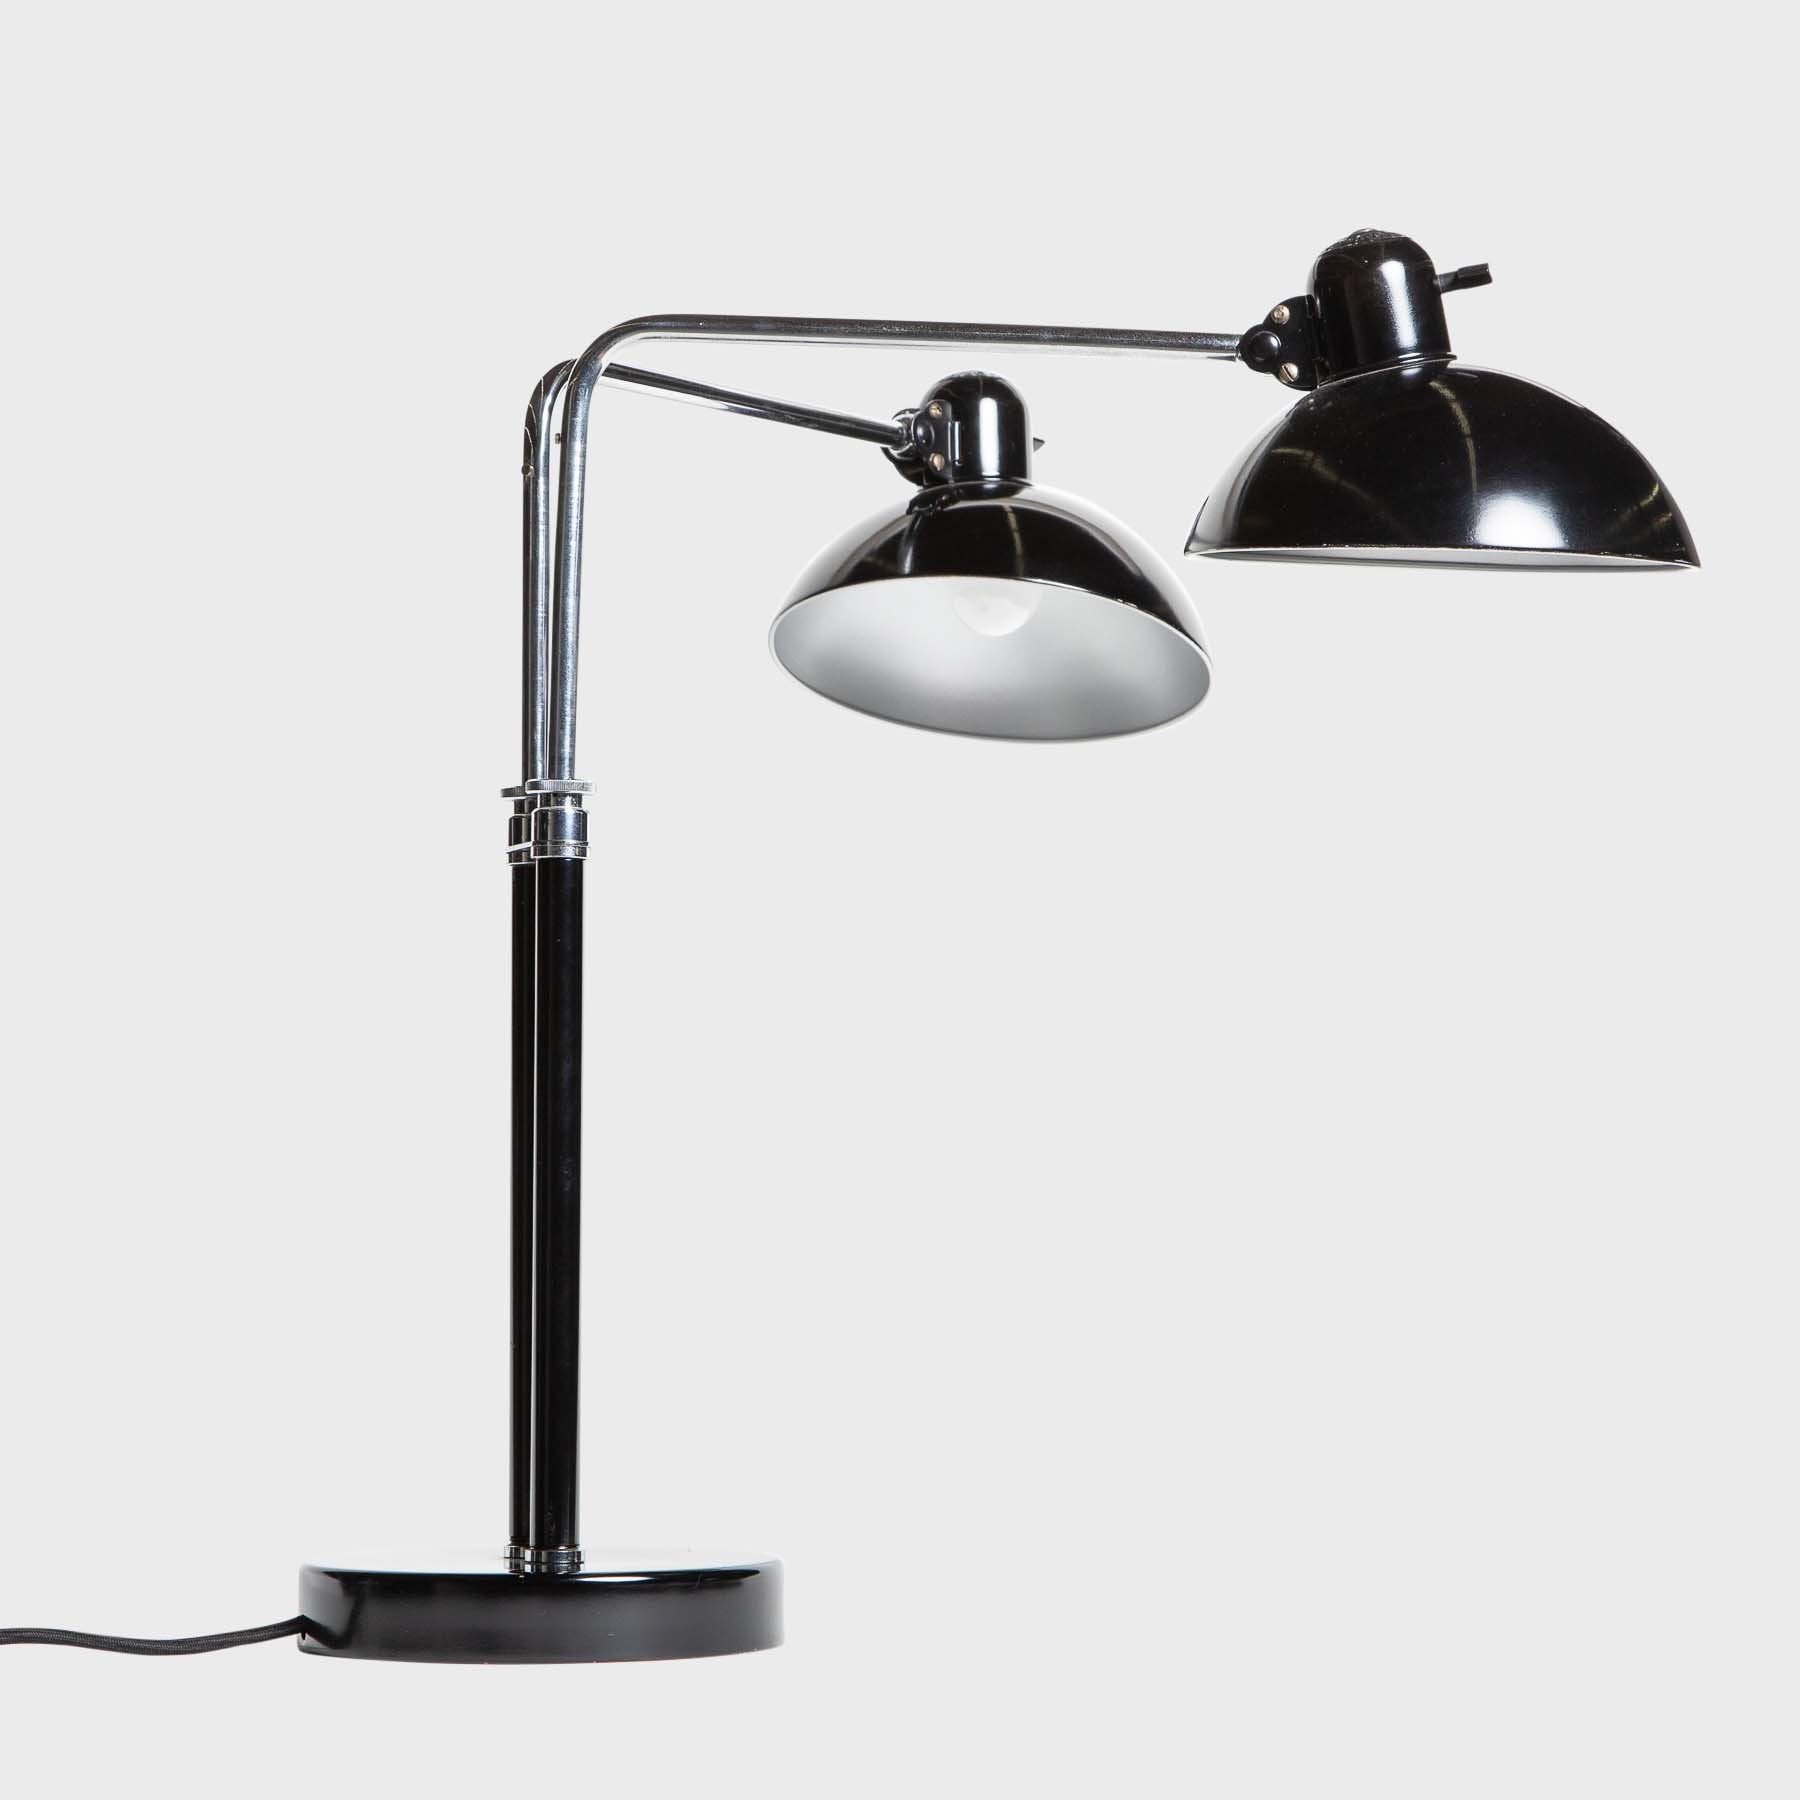 MAXFIELD PRIVATE COLLECTION | 1930'S BAUHAUS DELL LAMP